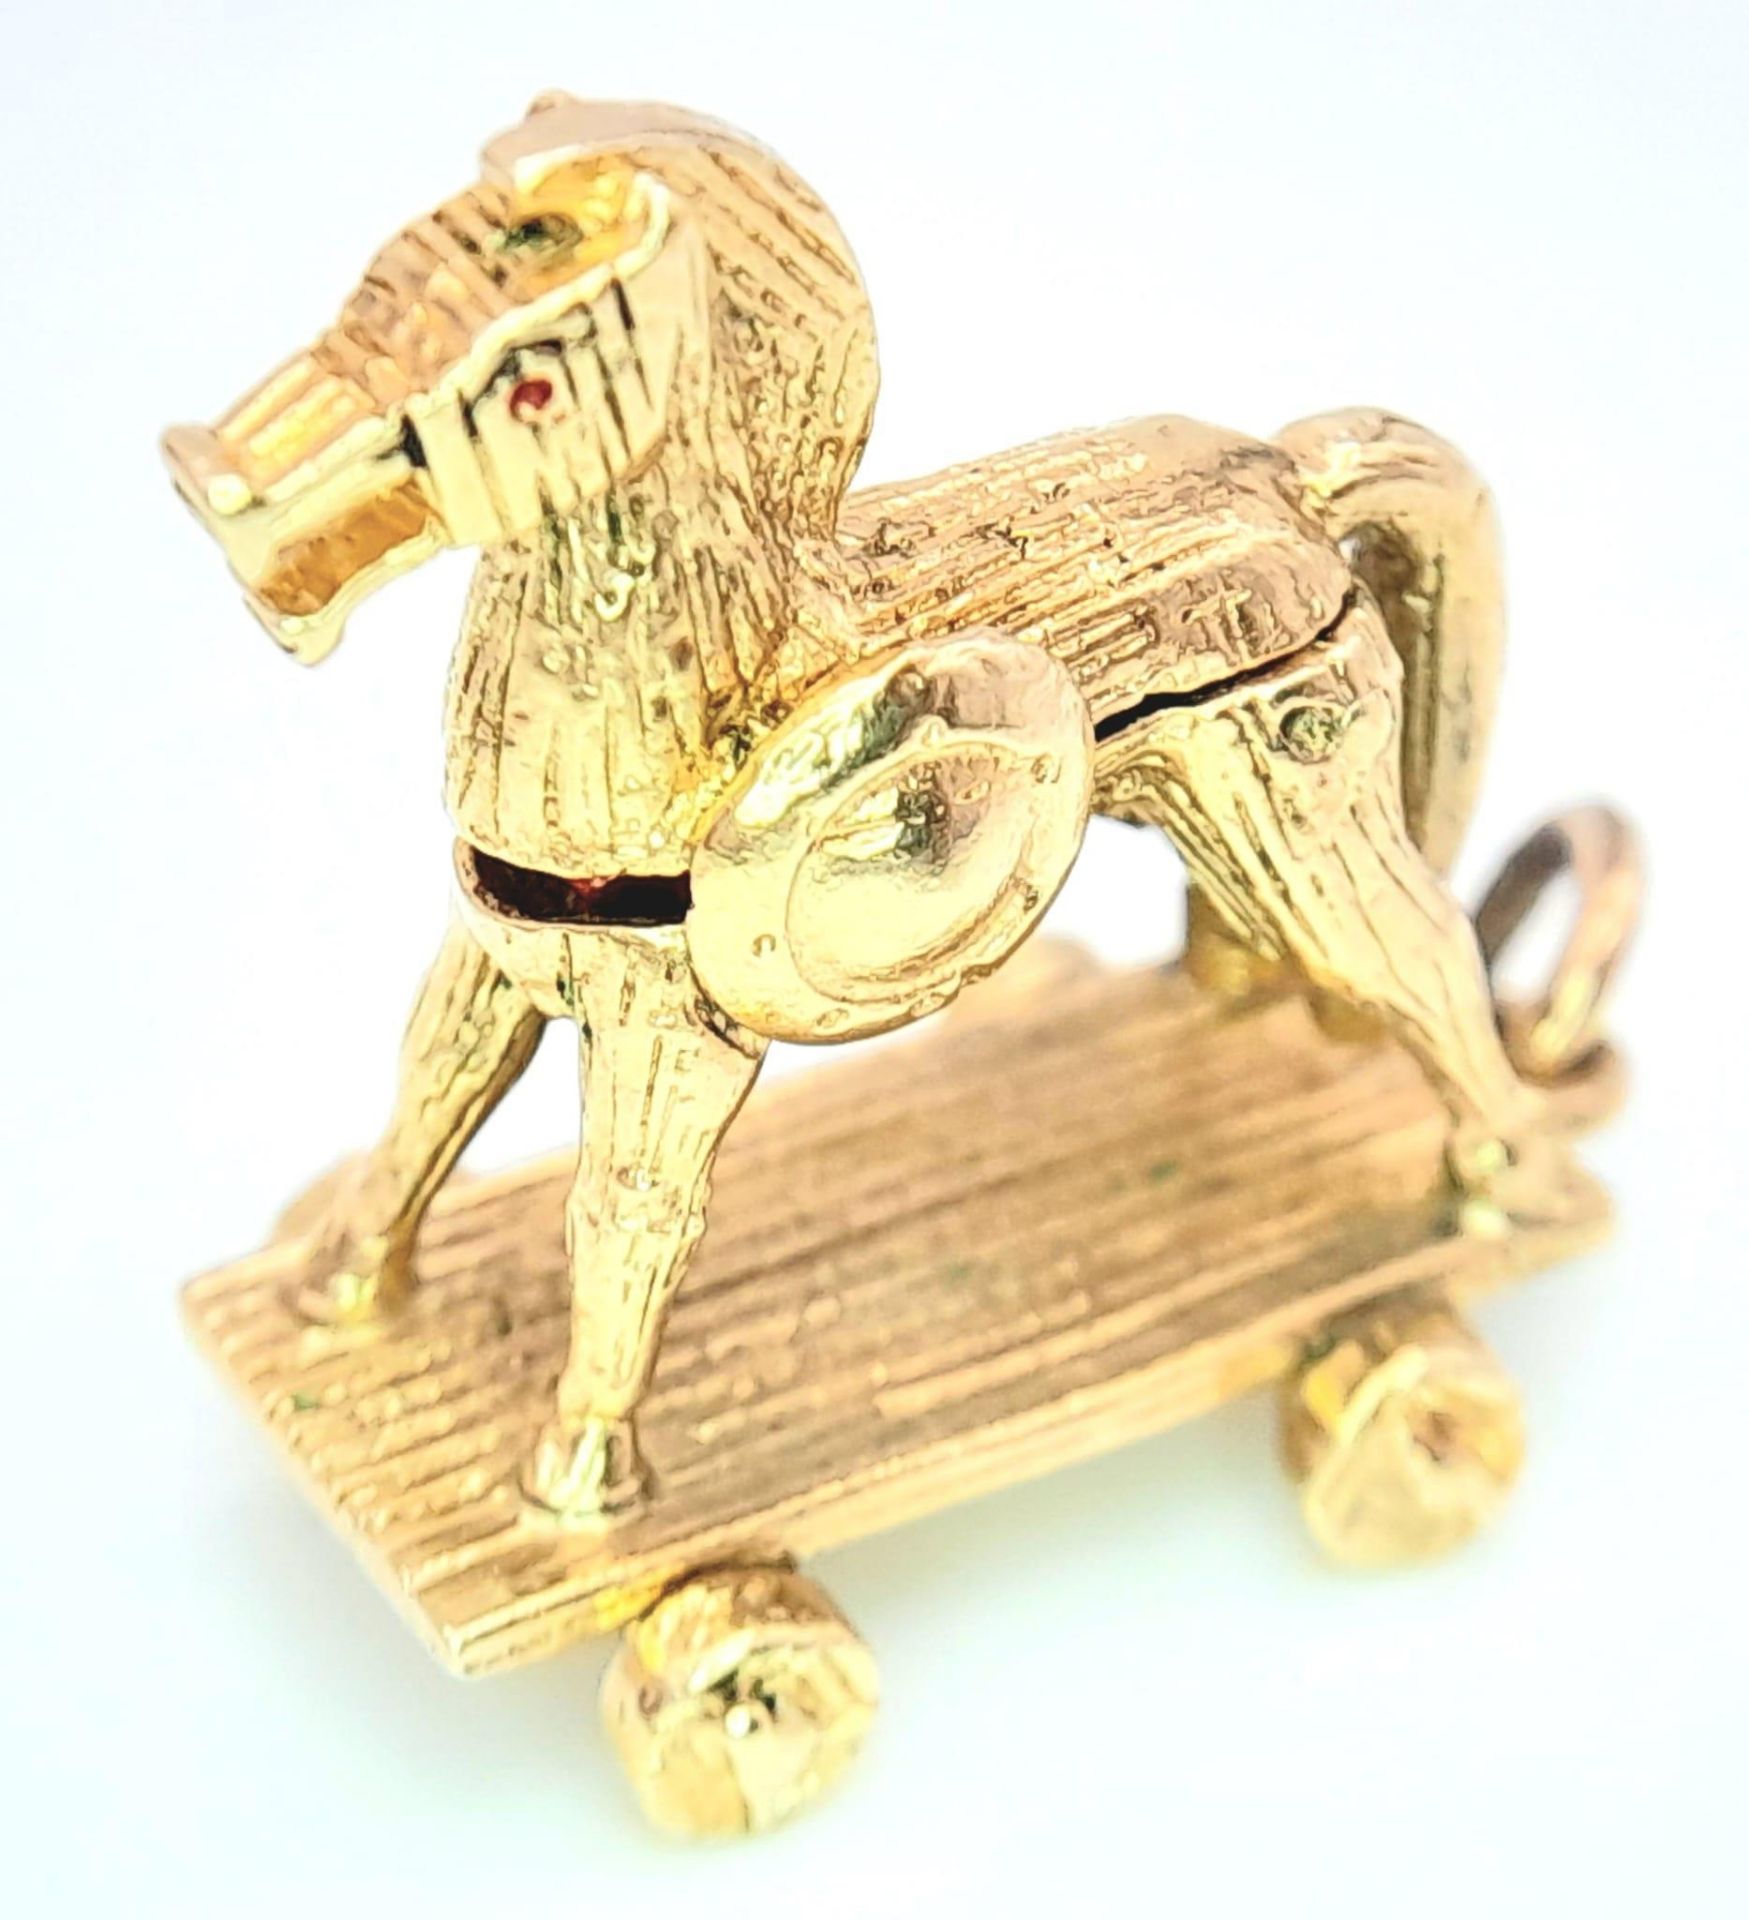 A 9K Yellow Gold Hobby Horse Charm. Opens to reveal soldiers. 2.4cm x 2.3cm, 5.8g total weight. Ref: